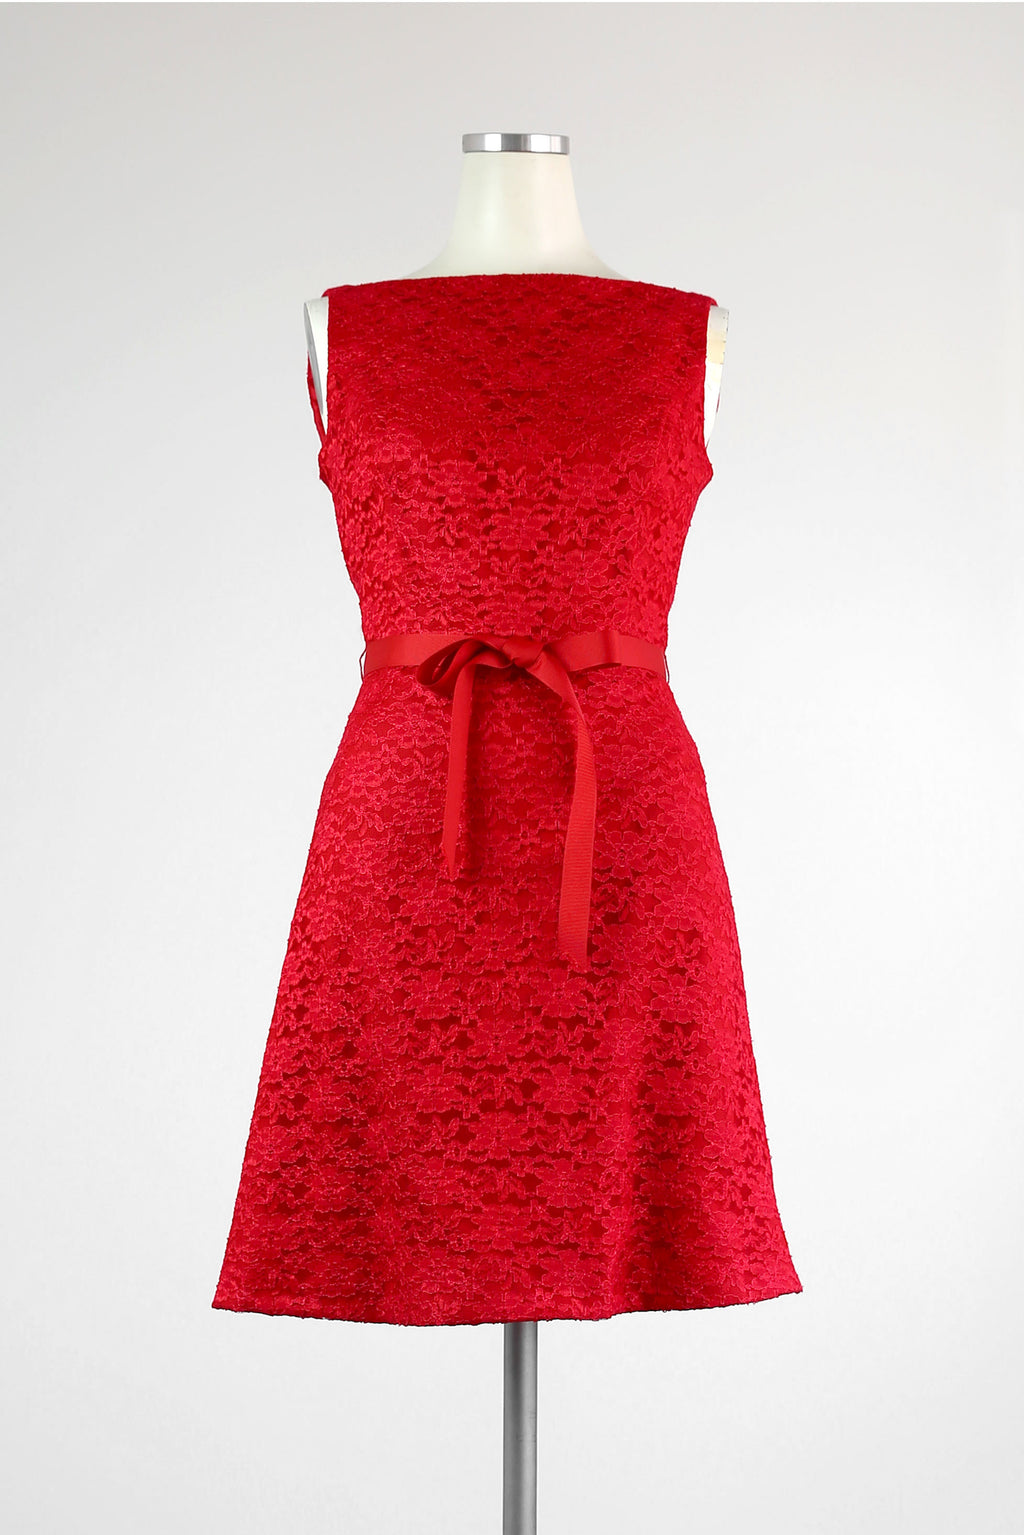 Classic Red Lace Dress with Perfect Fit - Tae With Jane NY